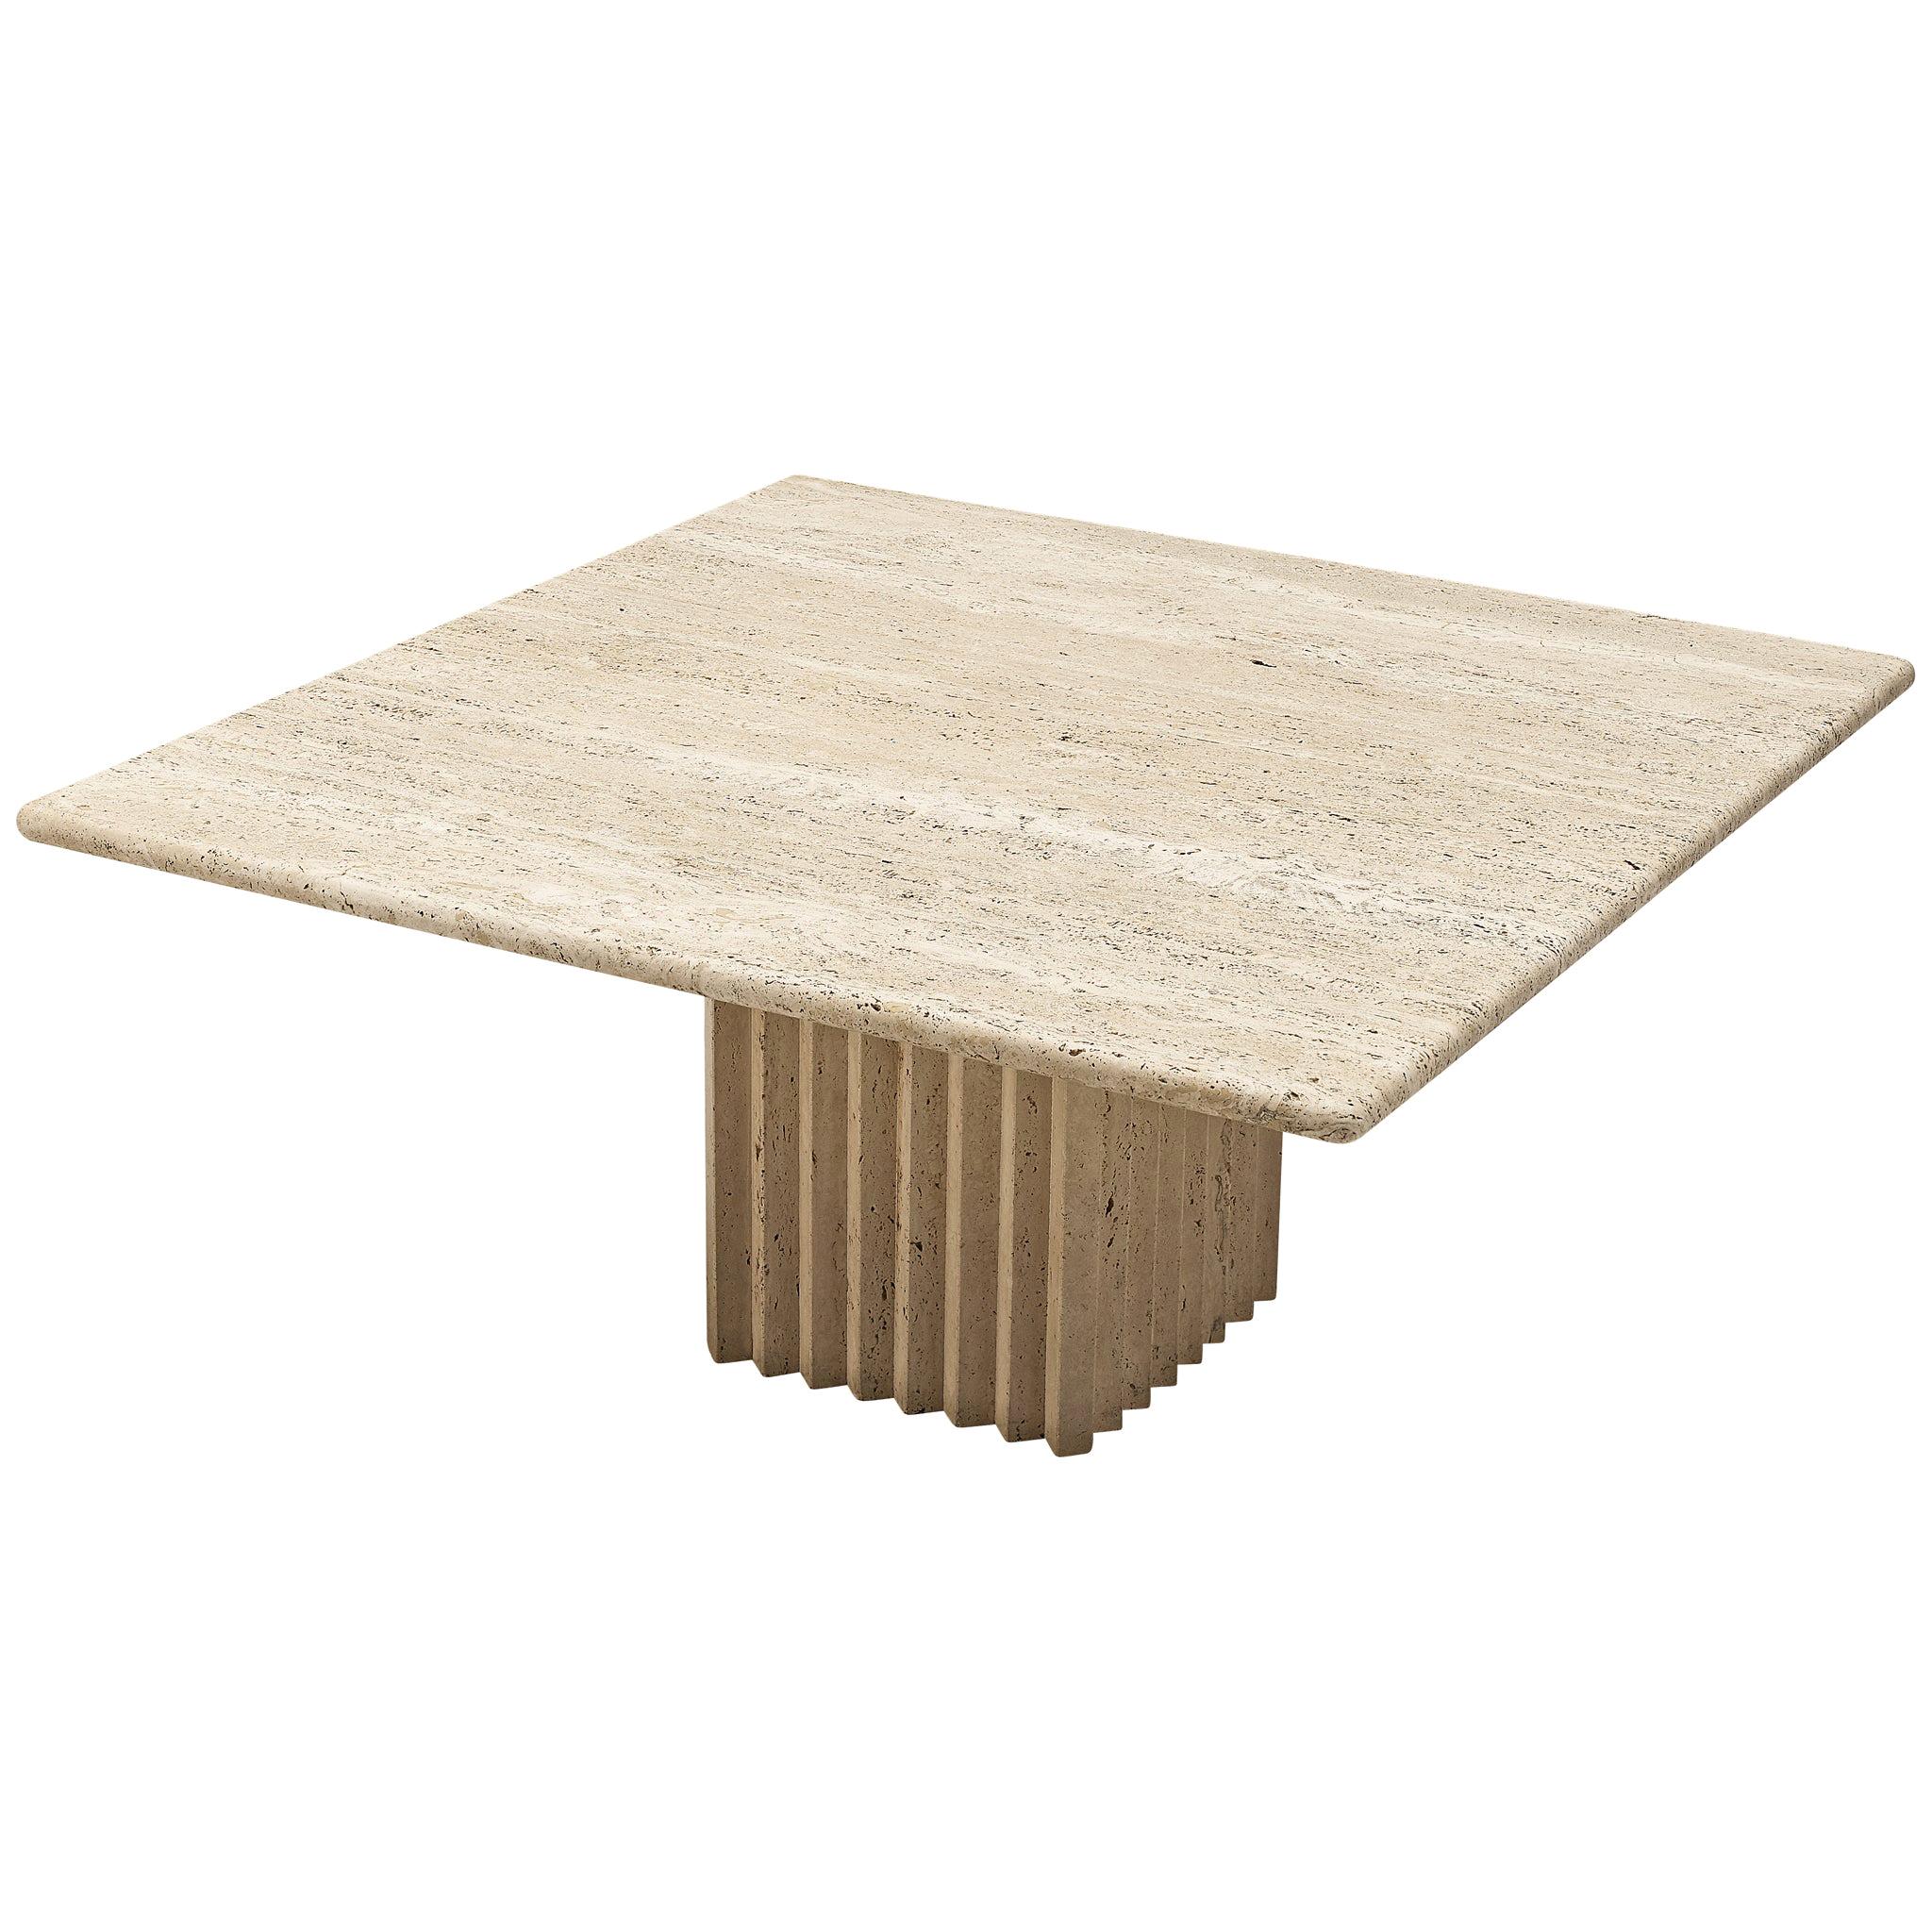 Sculptural Coffee Table in Travertine